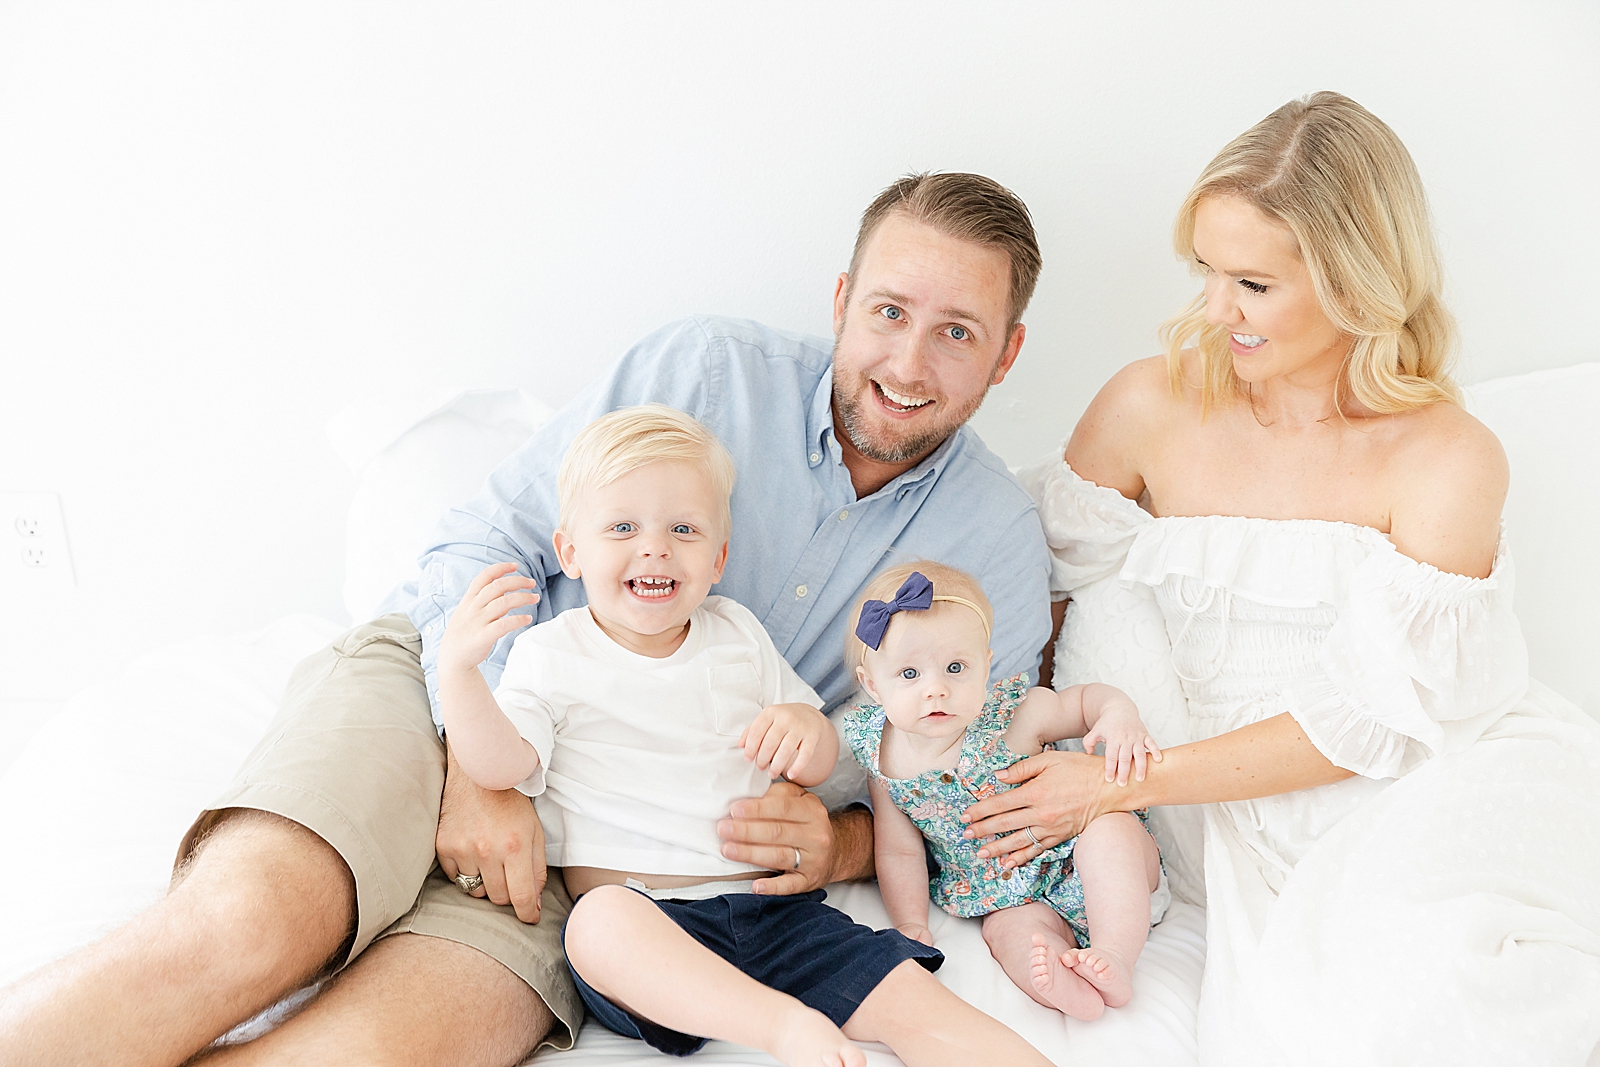 Studio family session on white bed dad baby and toddler smiling at camera while mom smiles at family